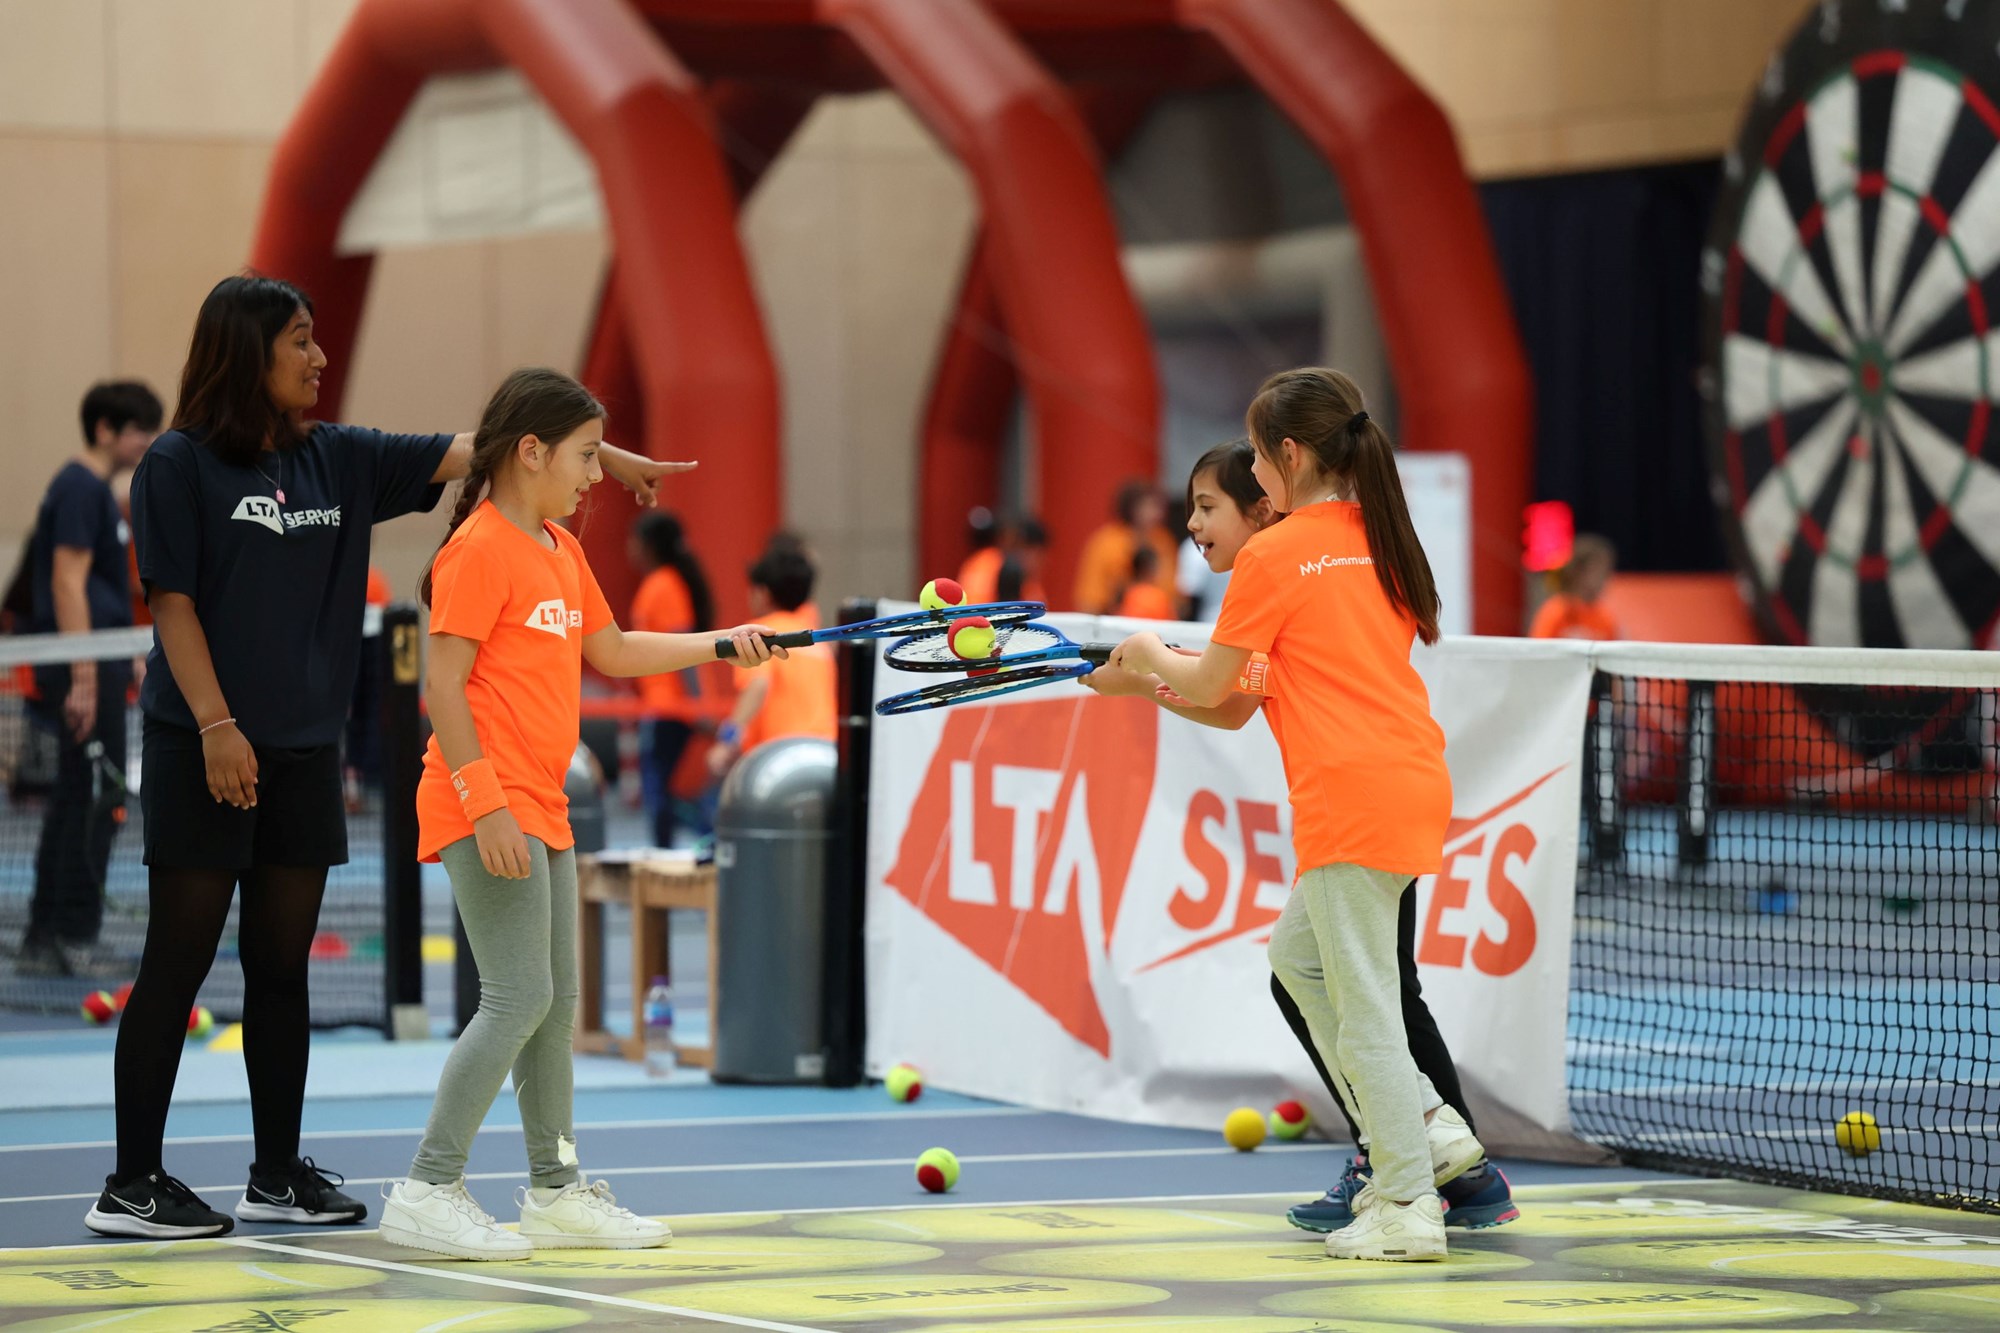 The kids pictured getting stuck into all the different activity stations at the LTA SERVES Tennis Festival at the Lee Valley Hockey and Tennis Centre, London. 